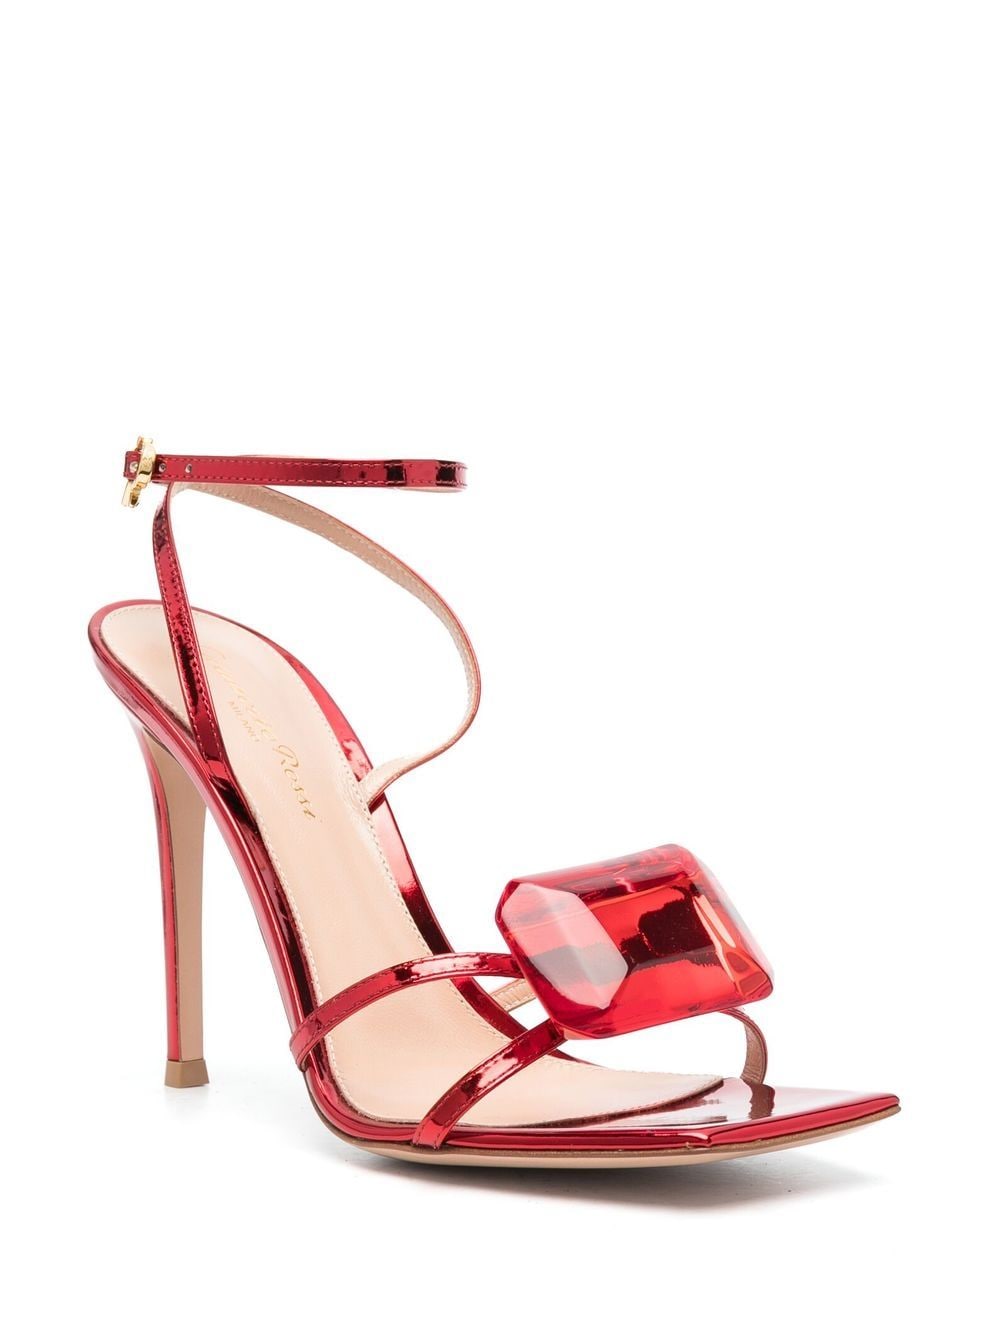 Gianvito Rossi Jaipur Holographic-effect 115mm Pumps - Farfetch